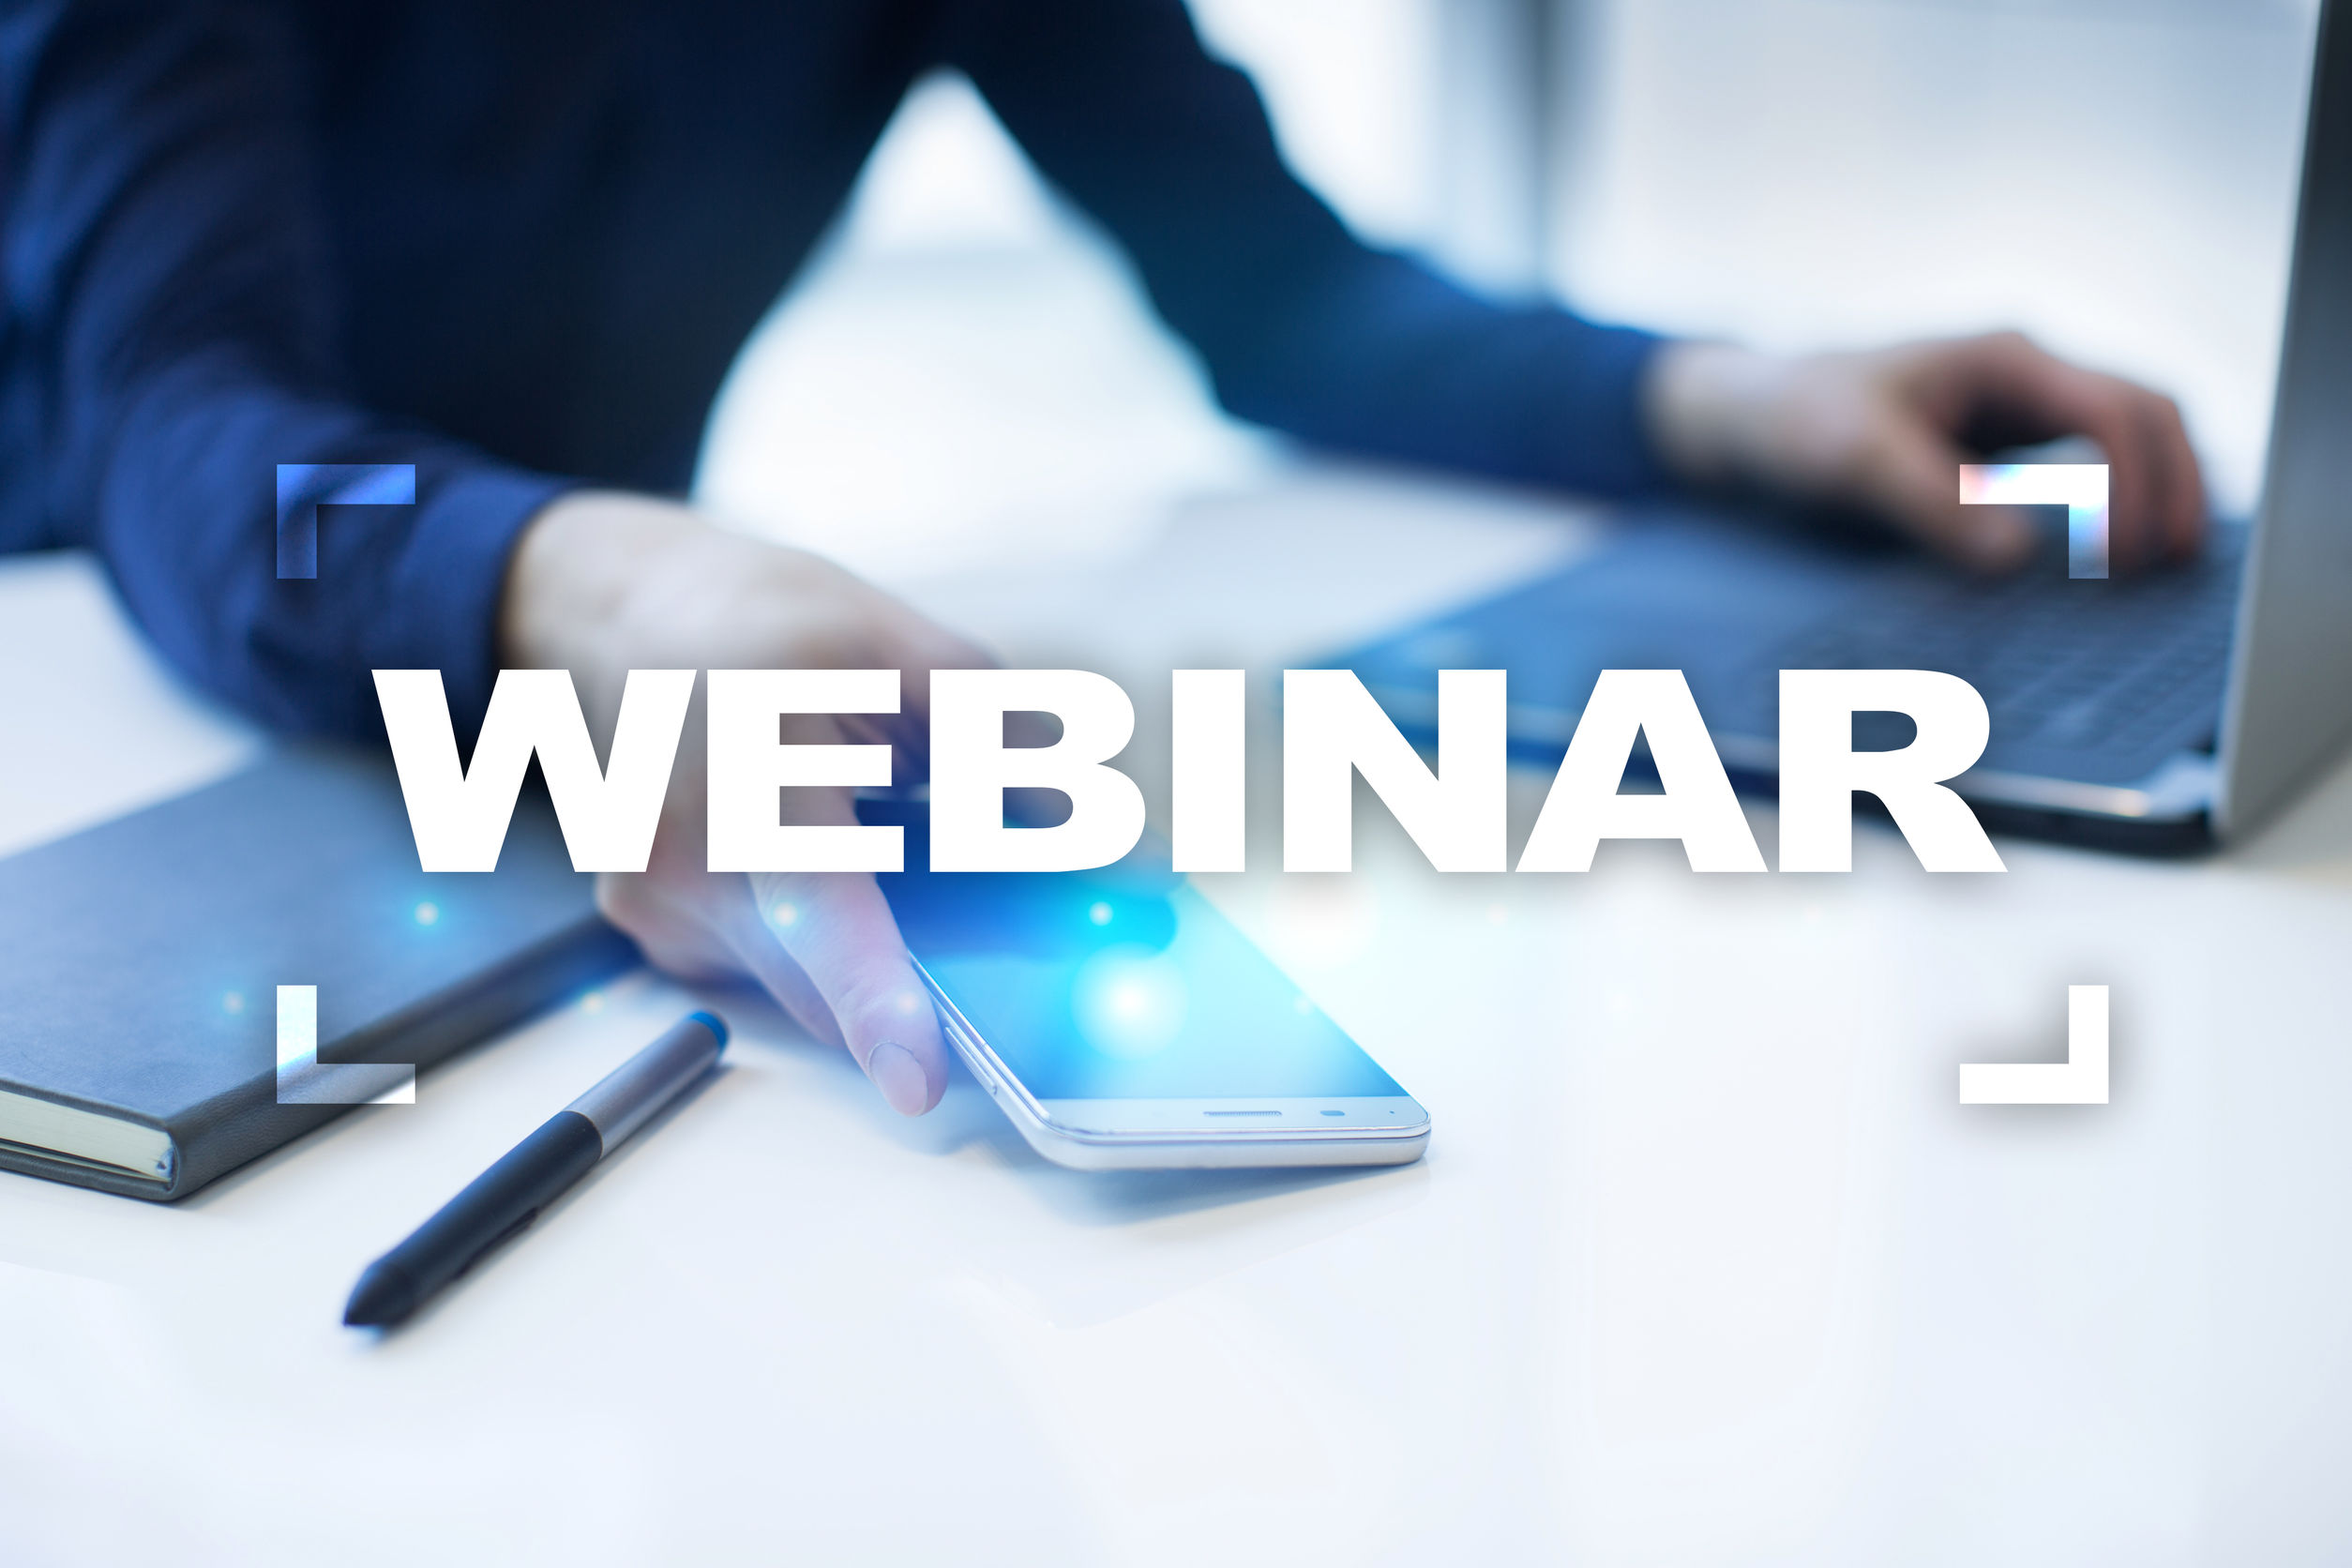 Explore aACE in Our May Webinars